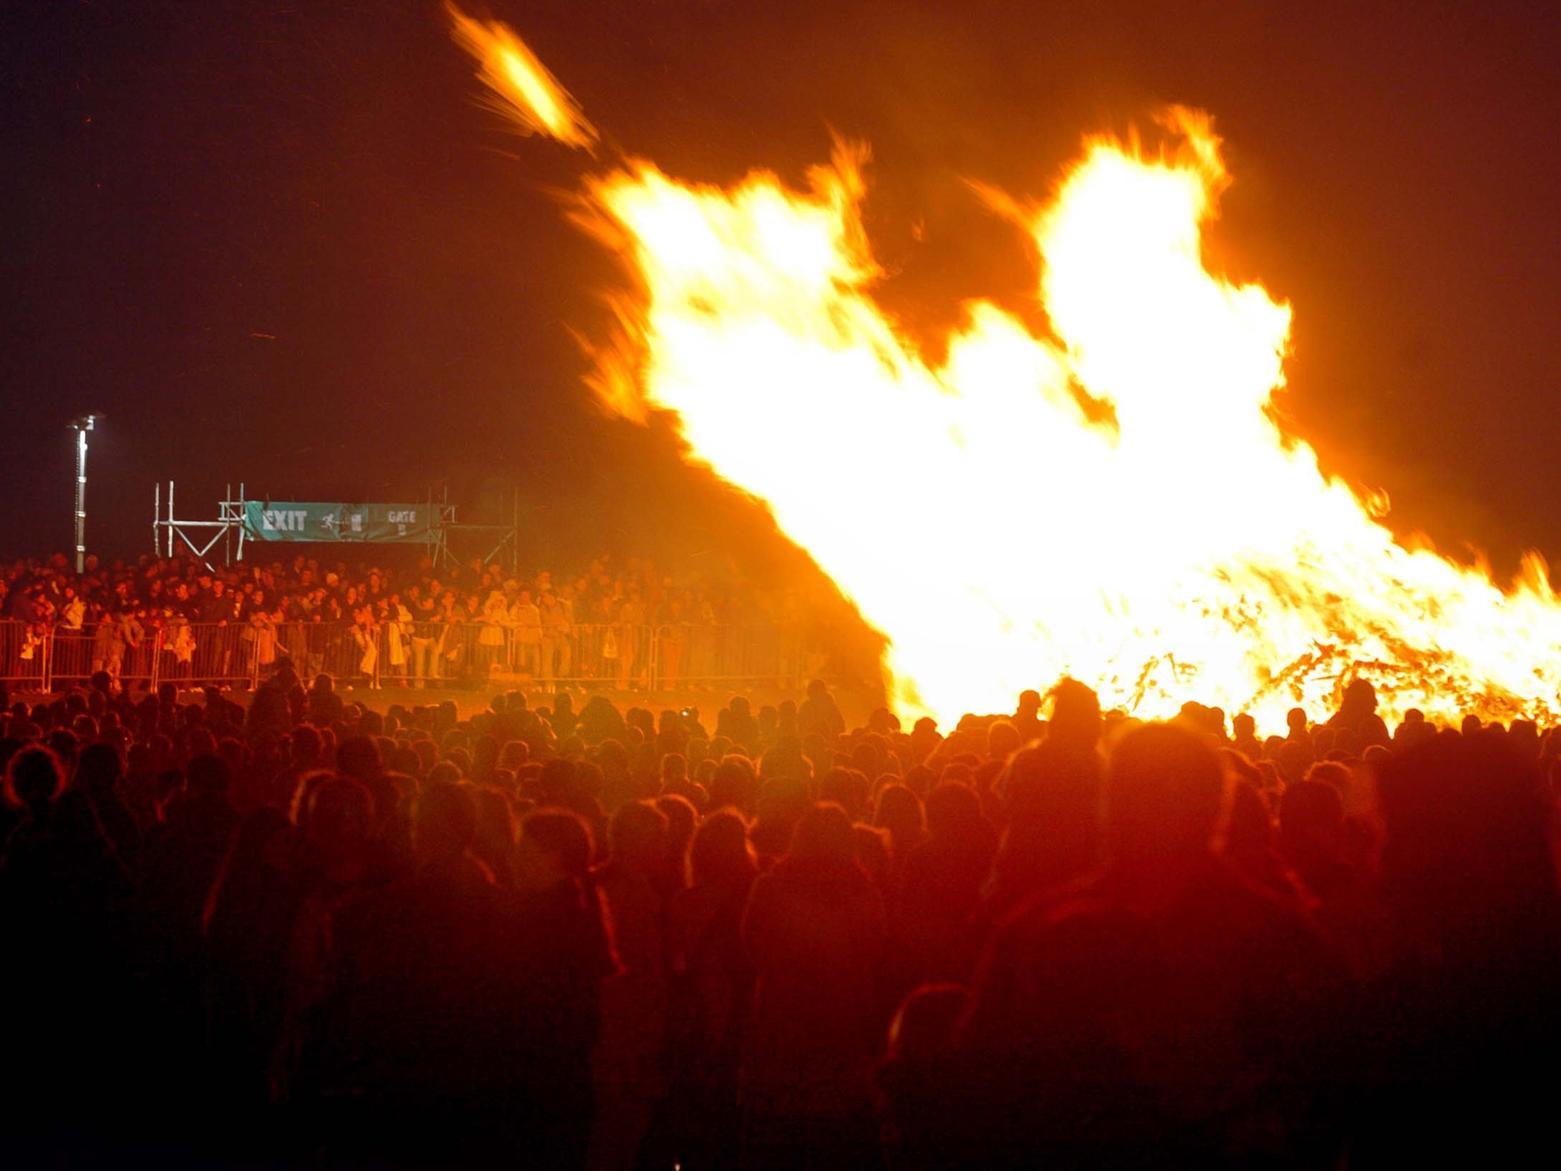 Huge crowds enjoyed the Roundhay Park bonfire and fireworks in the mid-2000s.